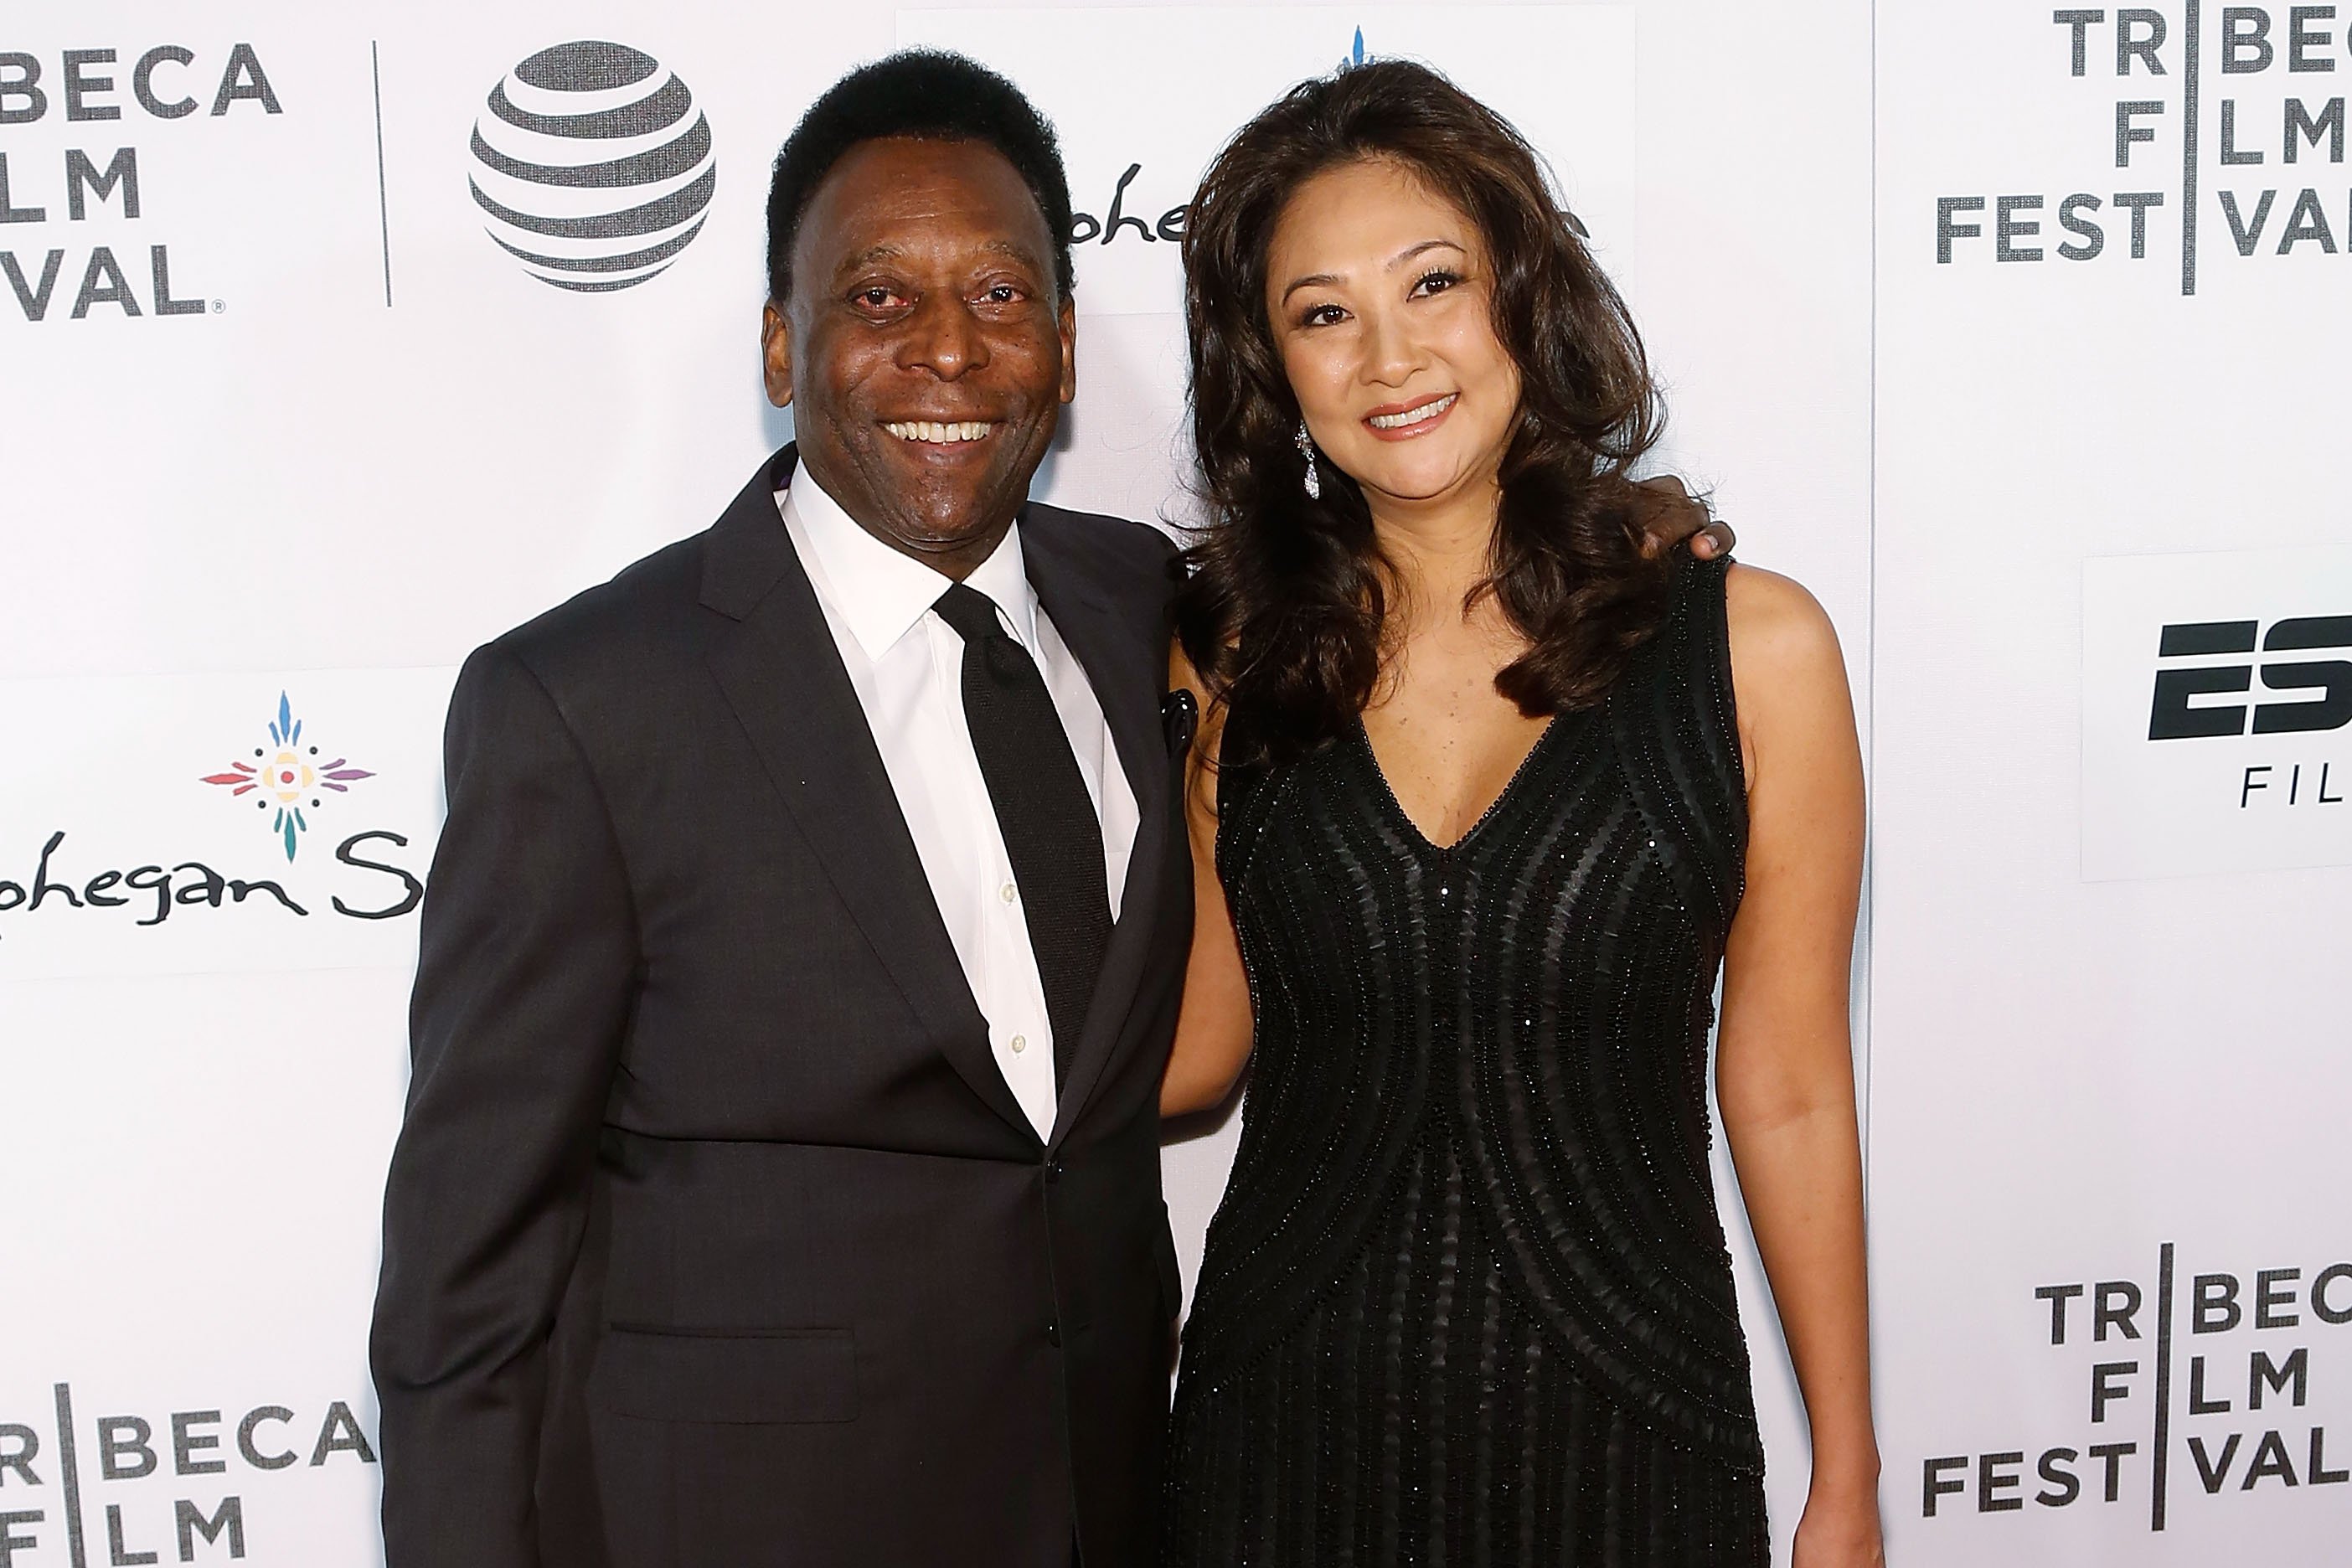 Pele and Marcia Aoki attend the premiere of "Pele: Birth of a Legend" at Borough of Manhattan Community College during the 2016 Tribeca Film Festival in New York City on April 23, 2016 | Getty Images